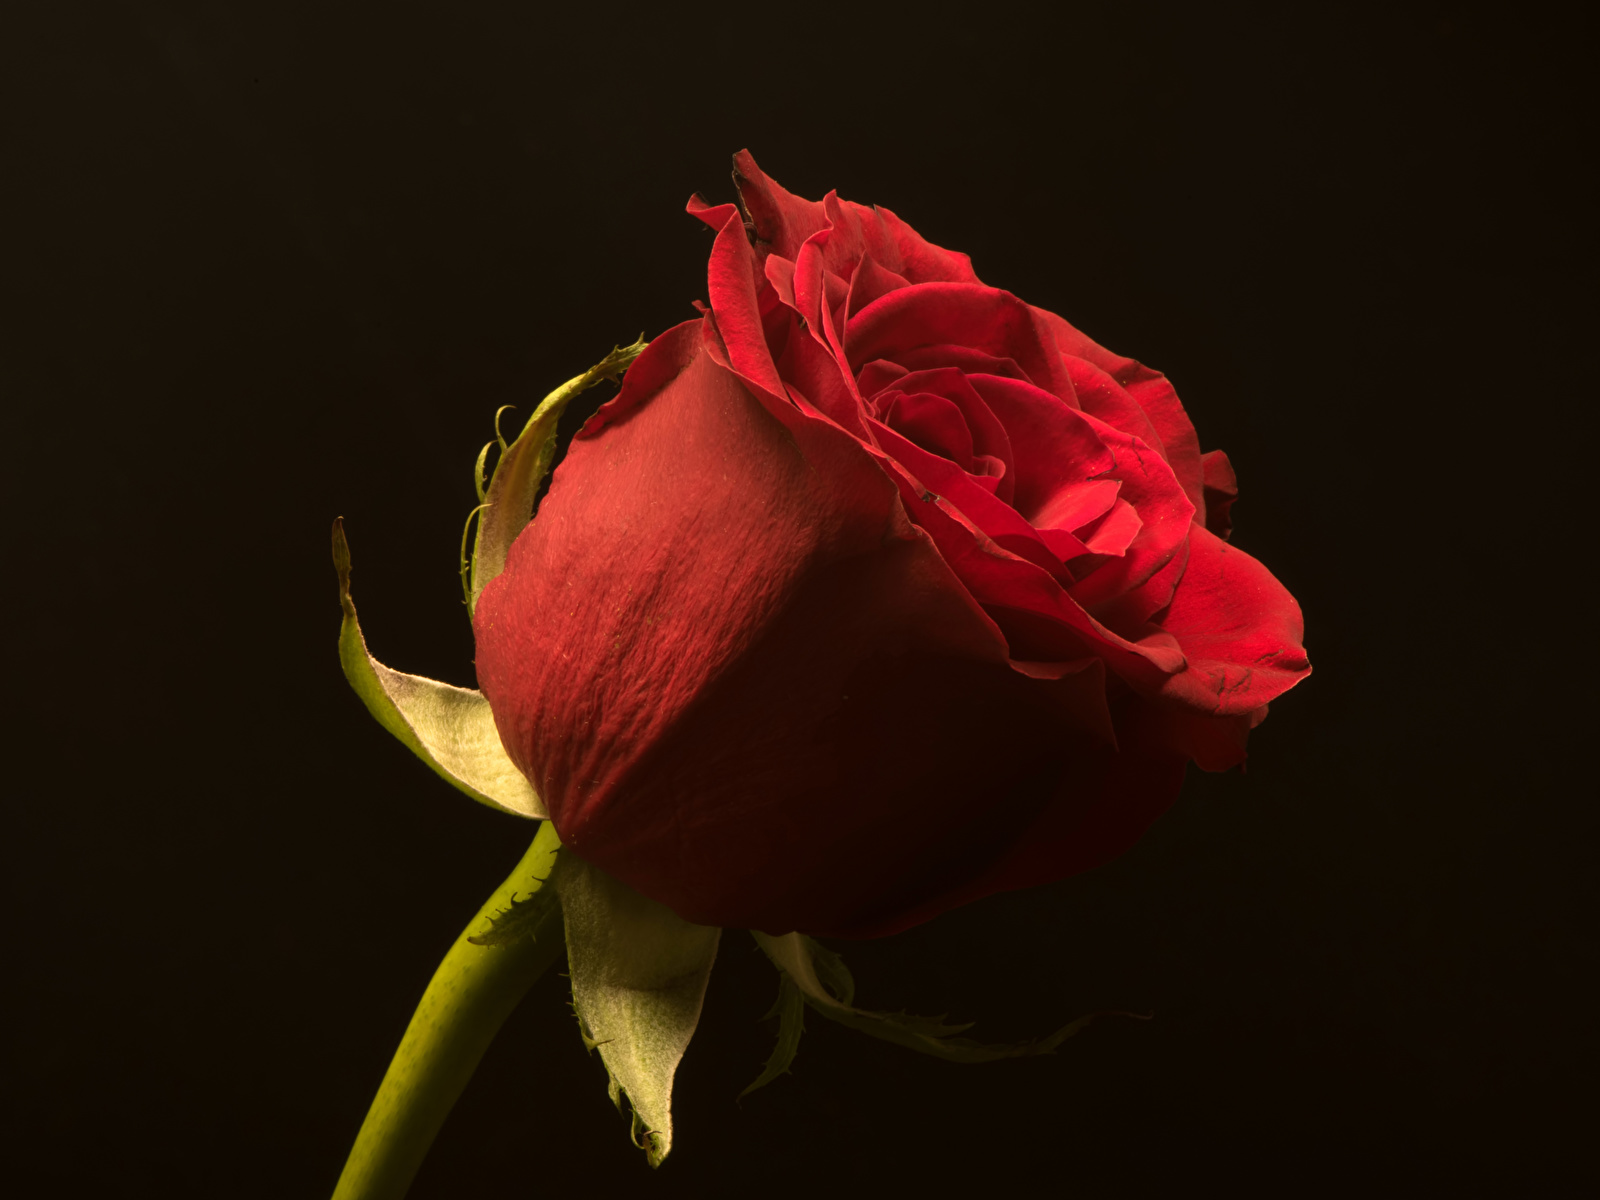 Wallpaper Red Roses Flowers Closeup Black background 1600x1200